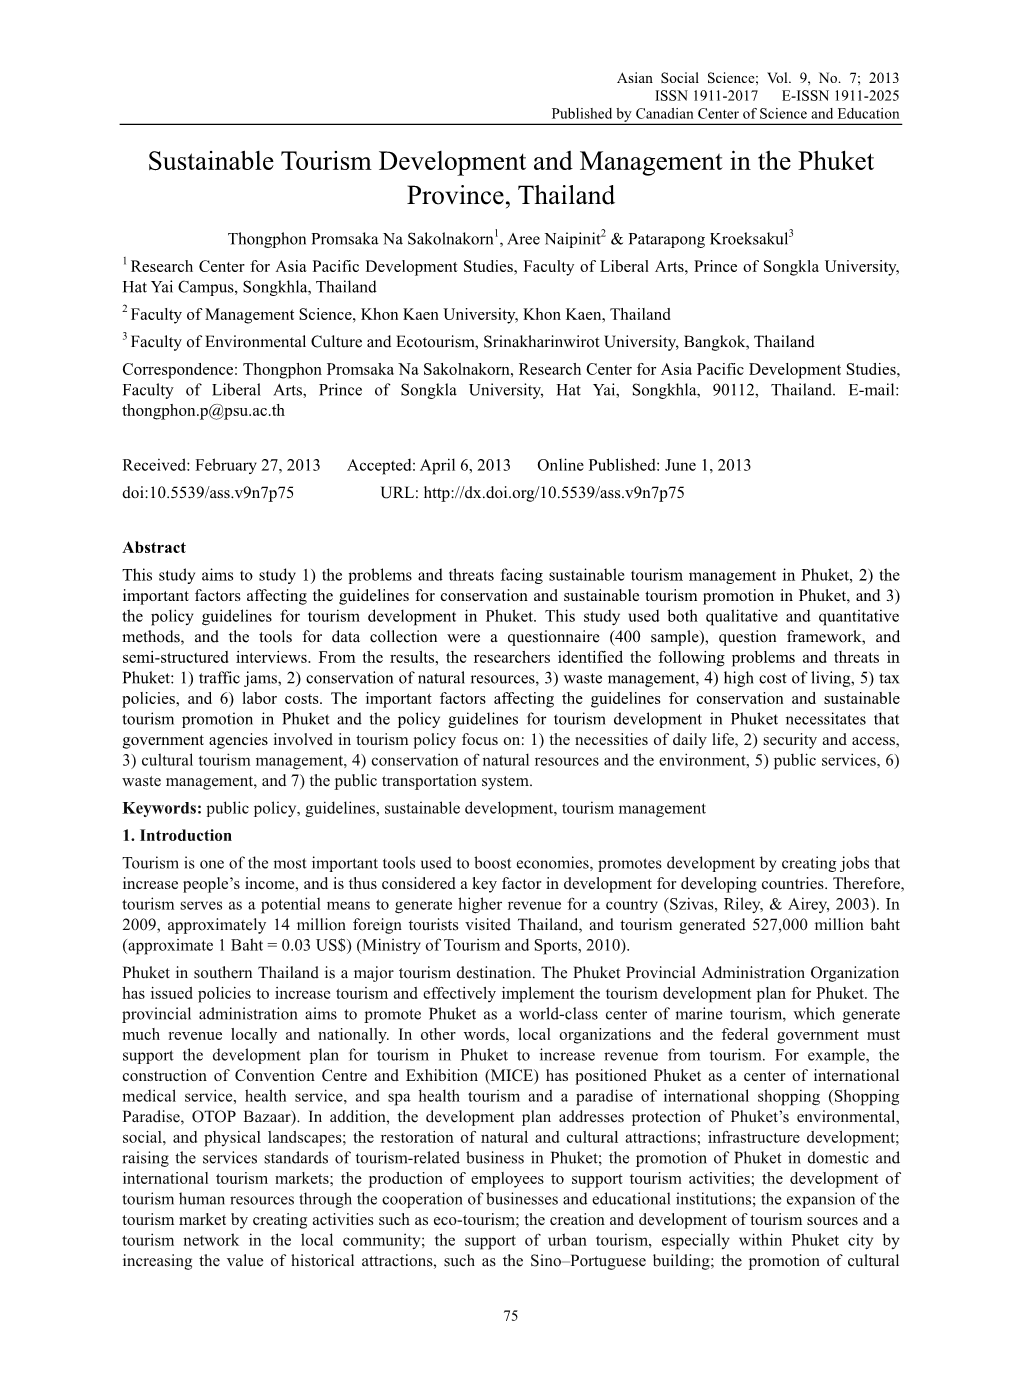 Sustainable Tourism Development and Management in the Phuket Province, Thailand